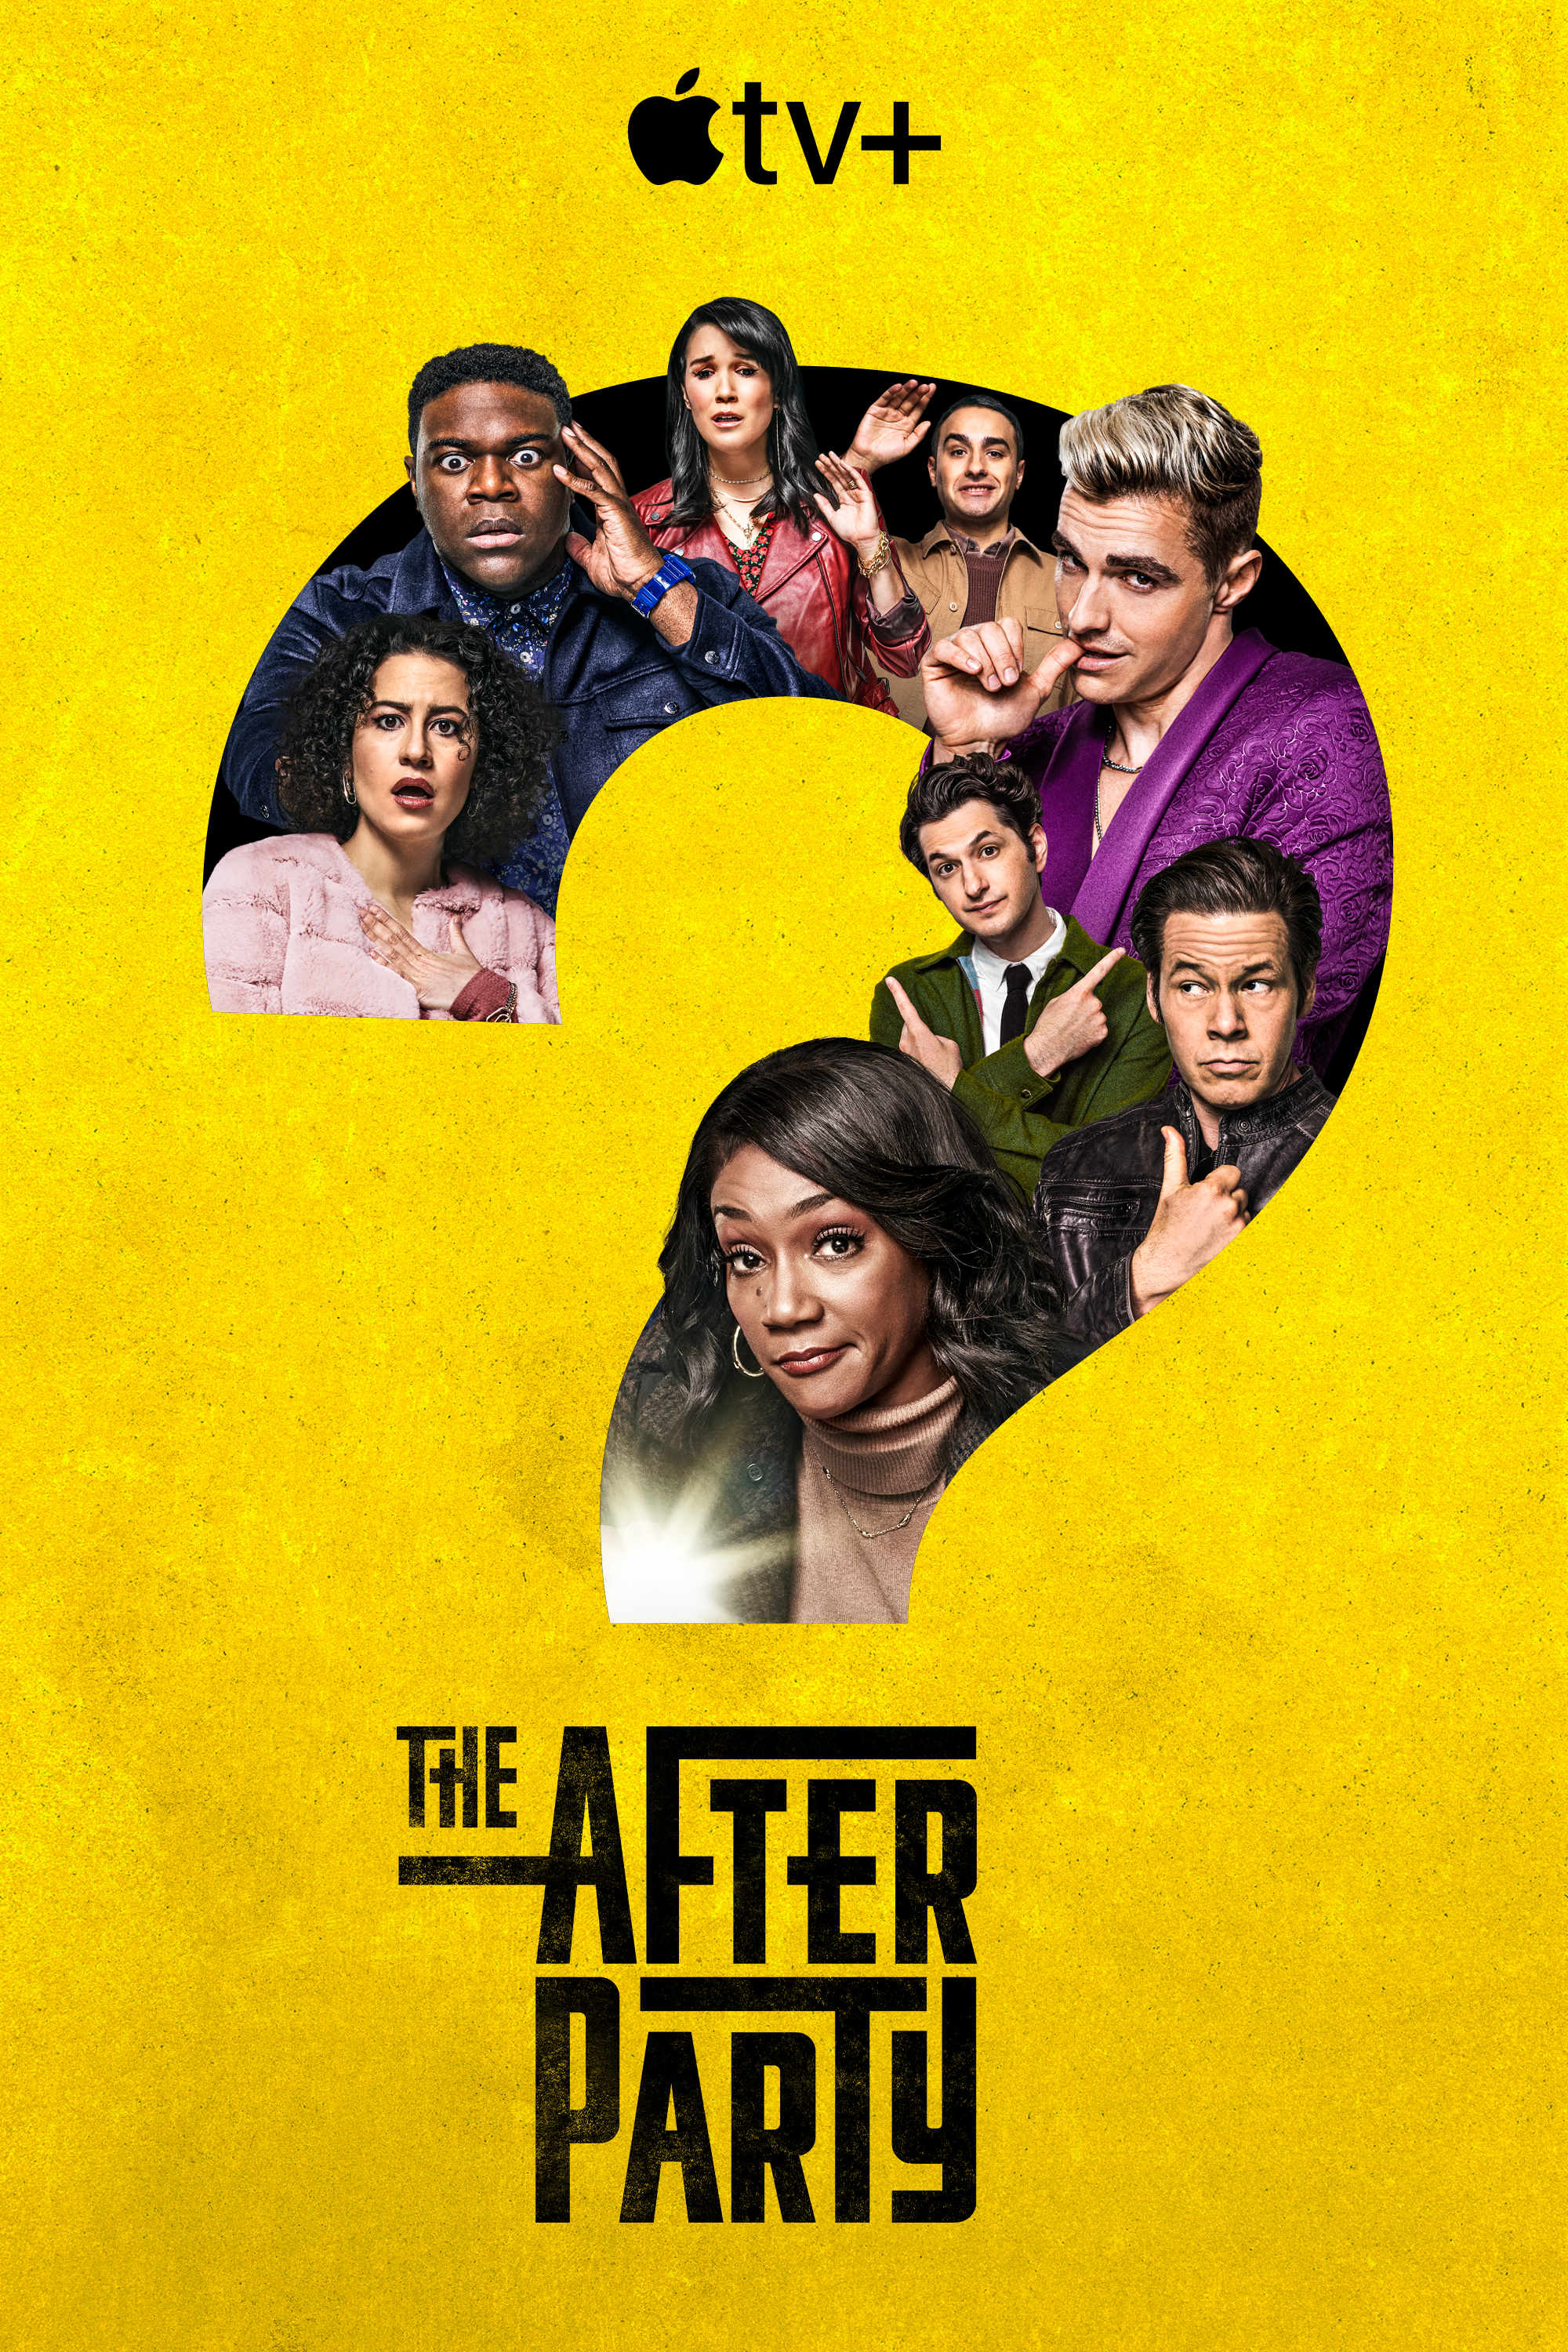 The Afterparty Season 2 Ending Explained: Edgar's Killer Identity